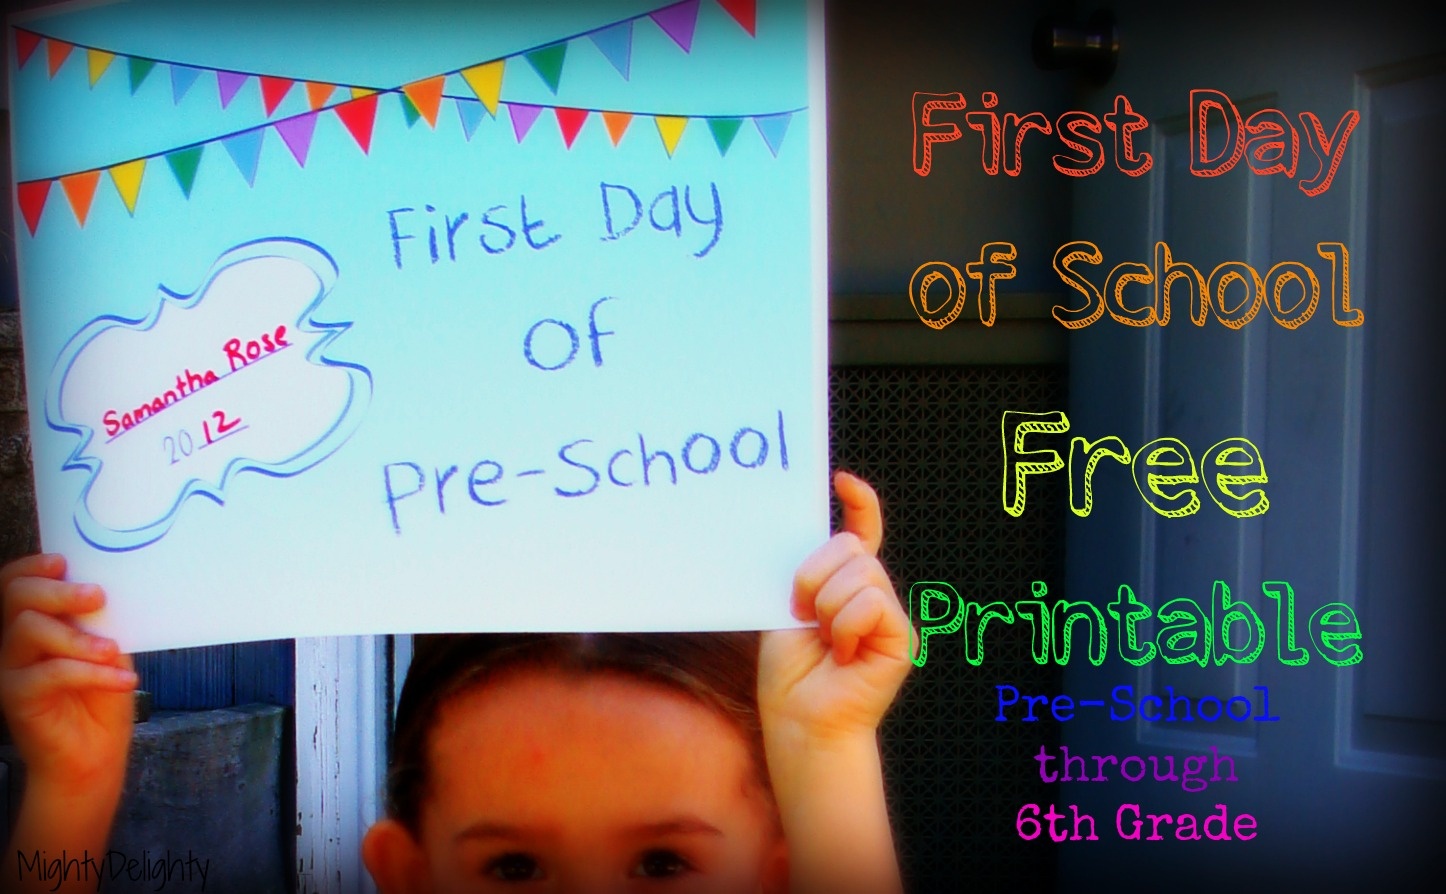 Mighty Delighty: First Day Of School {{Free Printable}} - Free Printable First Day Of School Activities